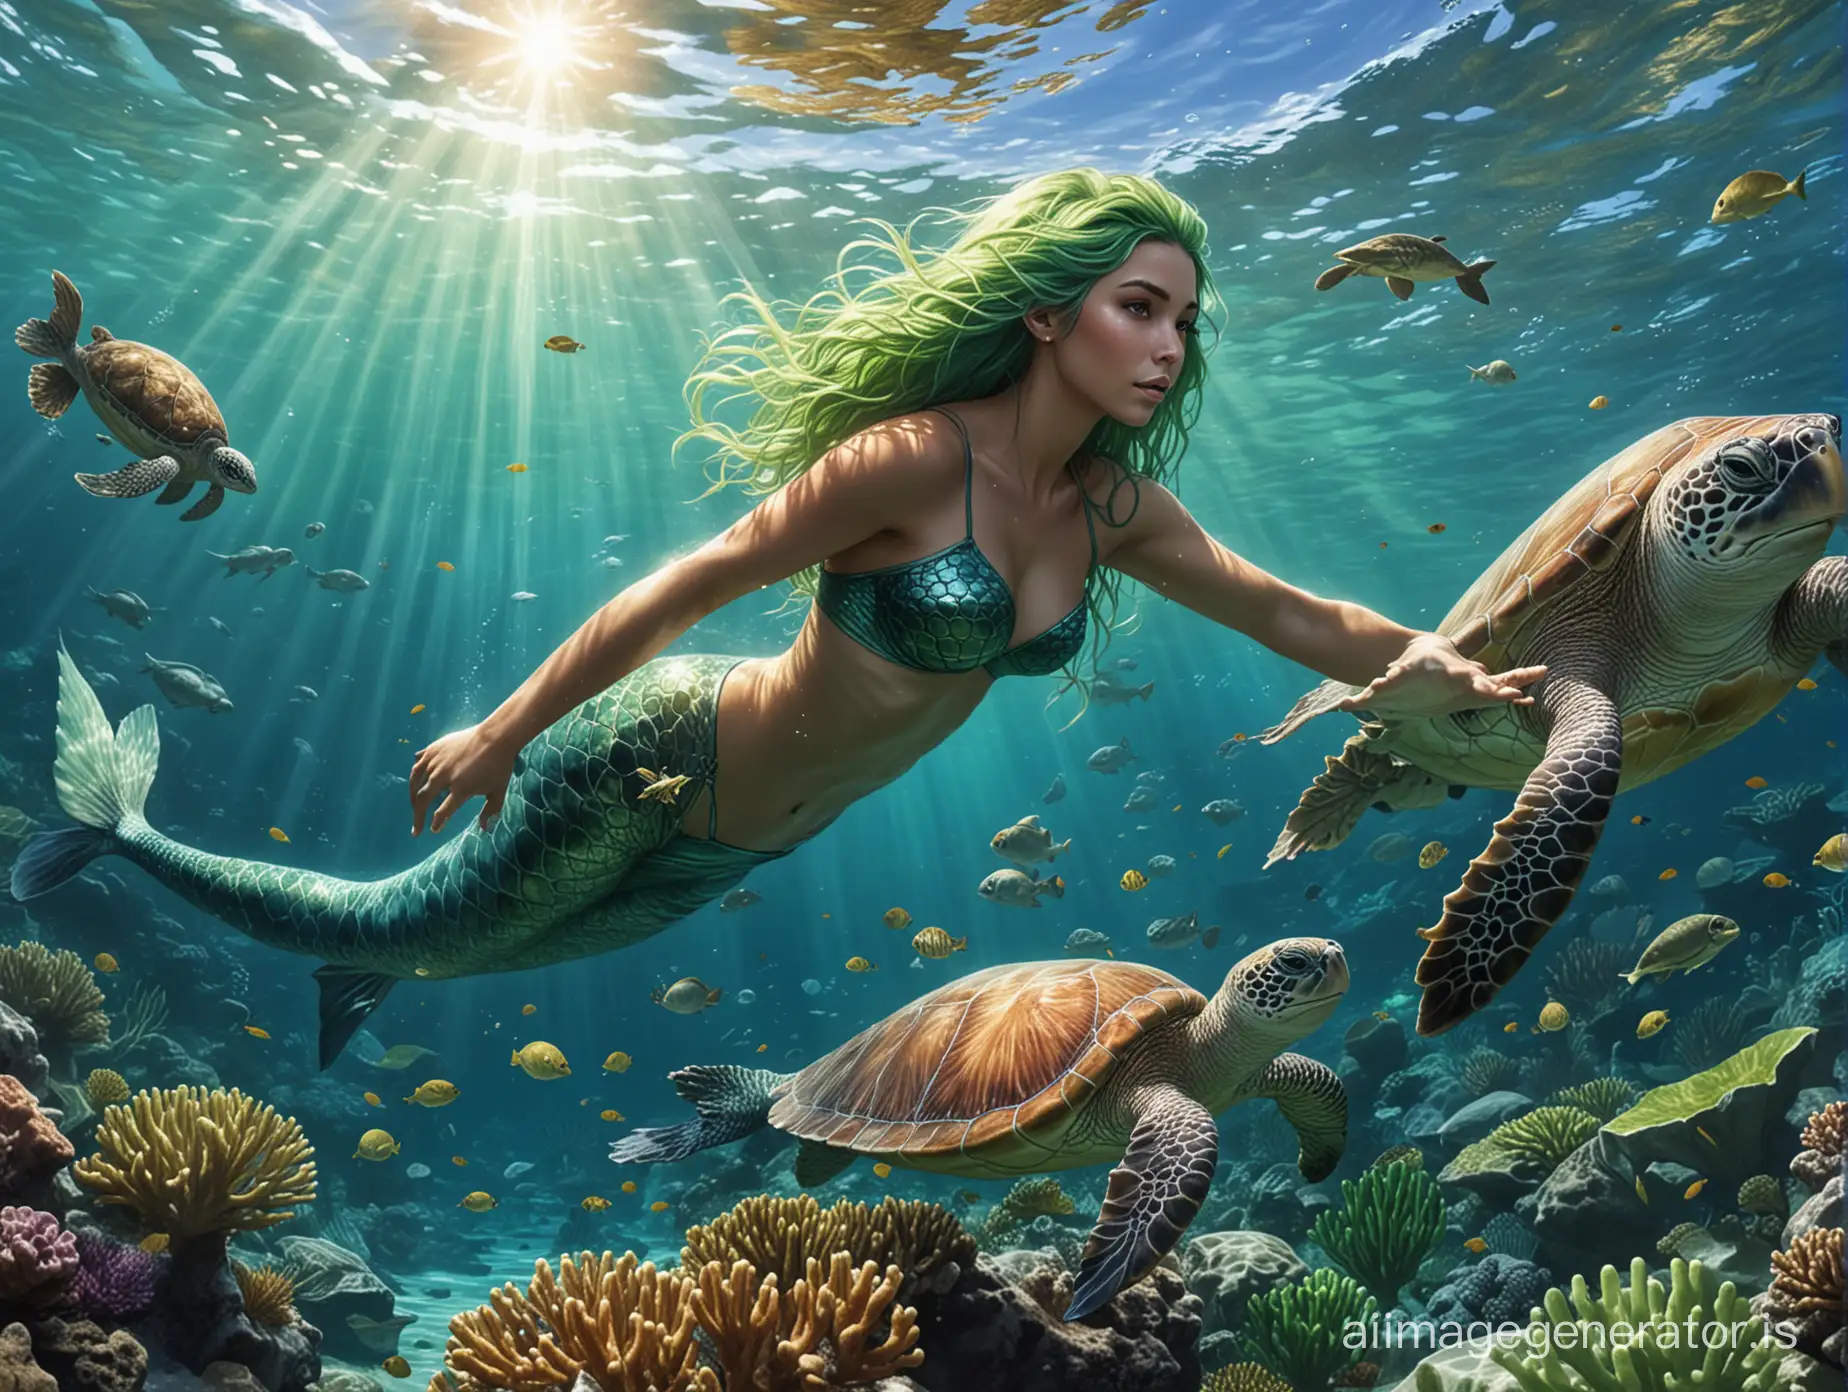 A mermaid with light brown skin with green hair, and an olive-brown tail with her emrald green crop with white veins is swimming under the ocean alongside big turtles and corals.